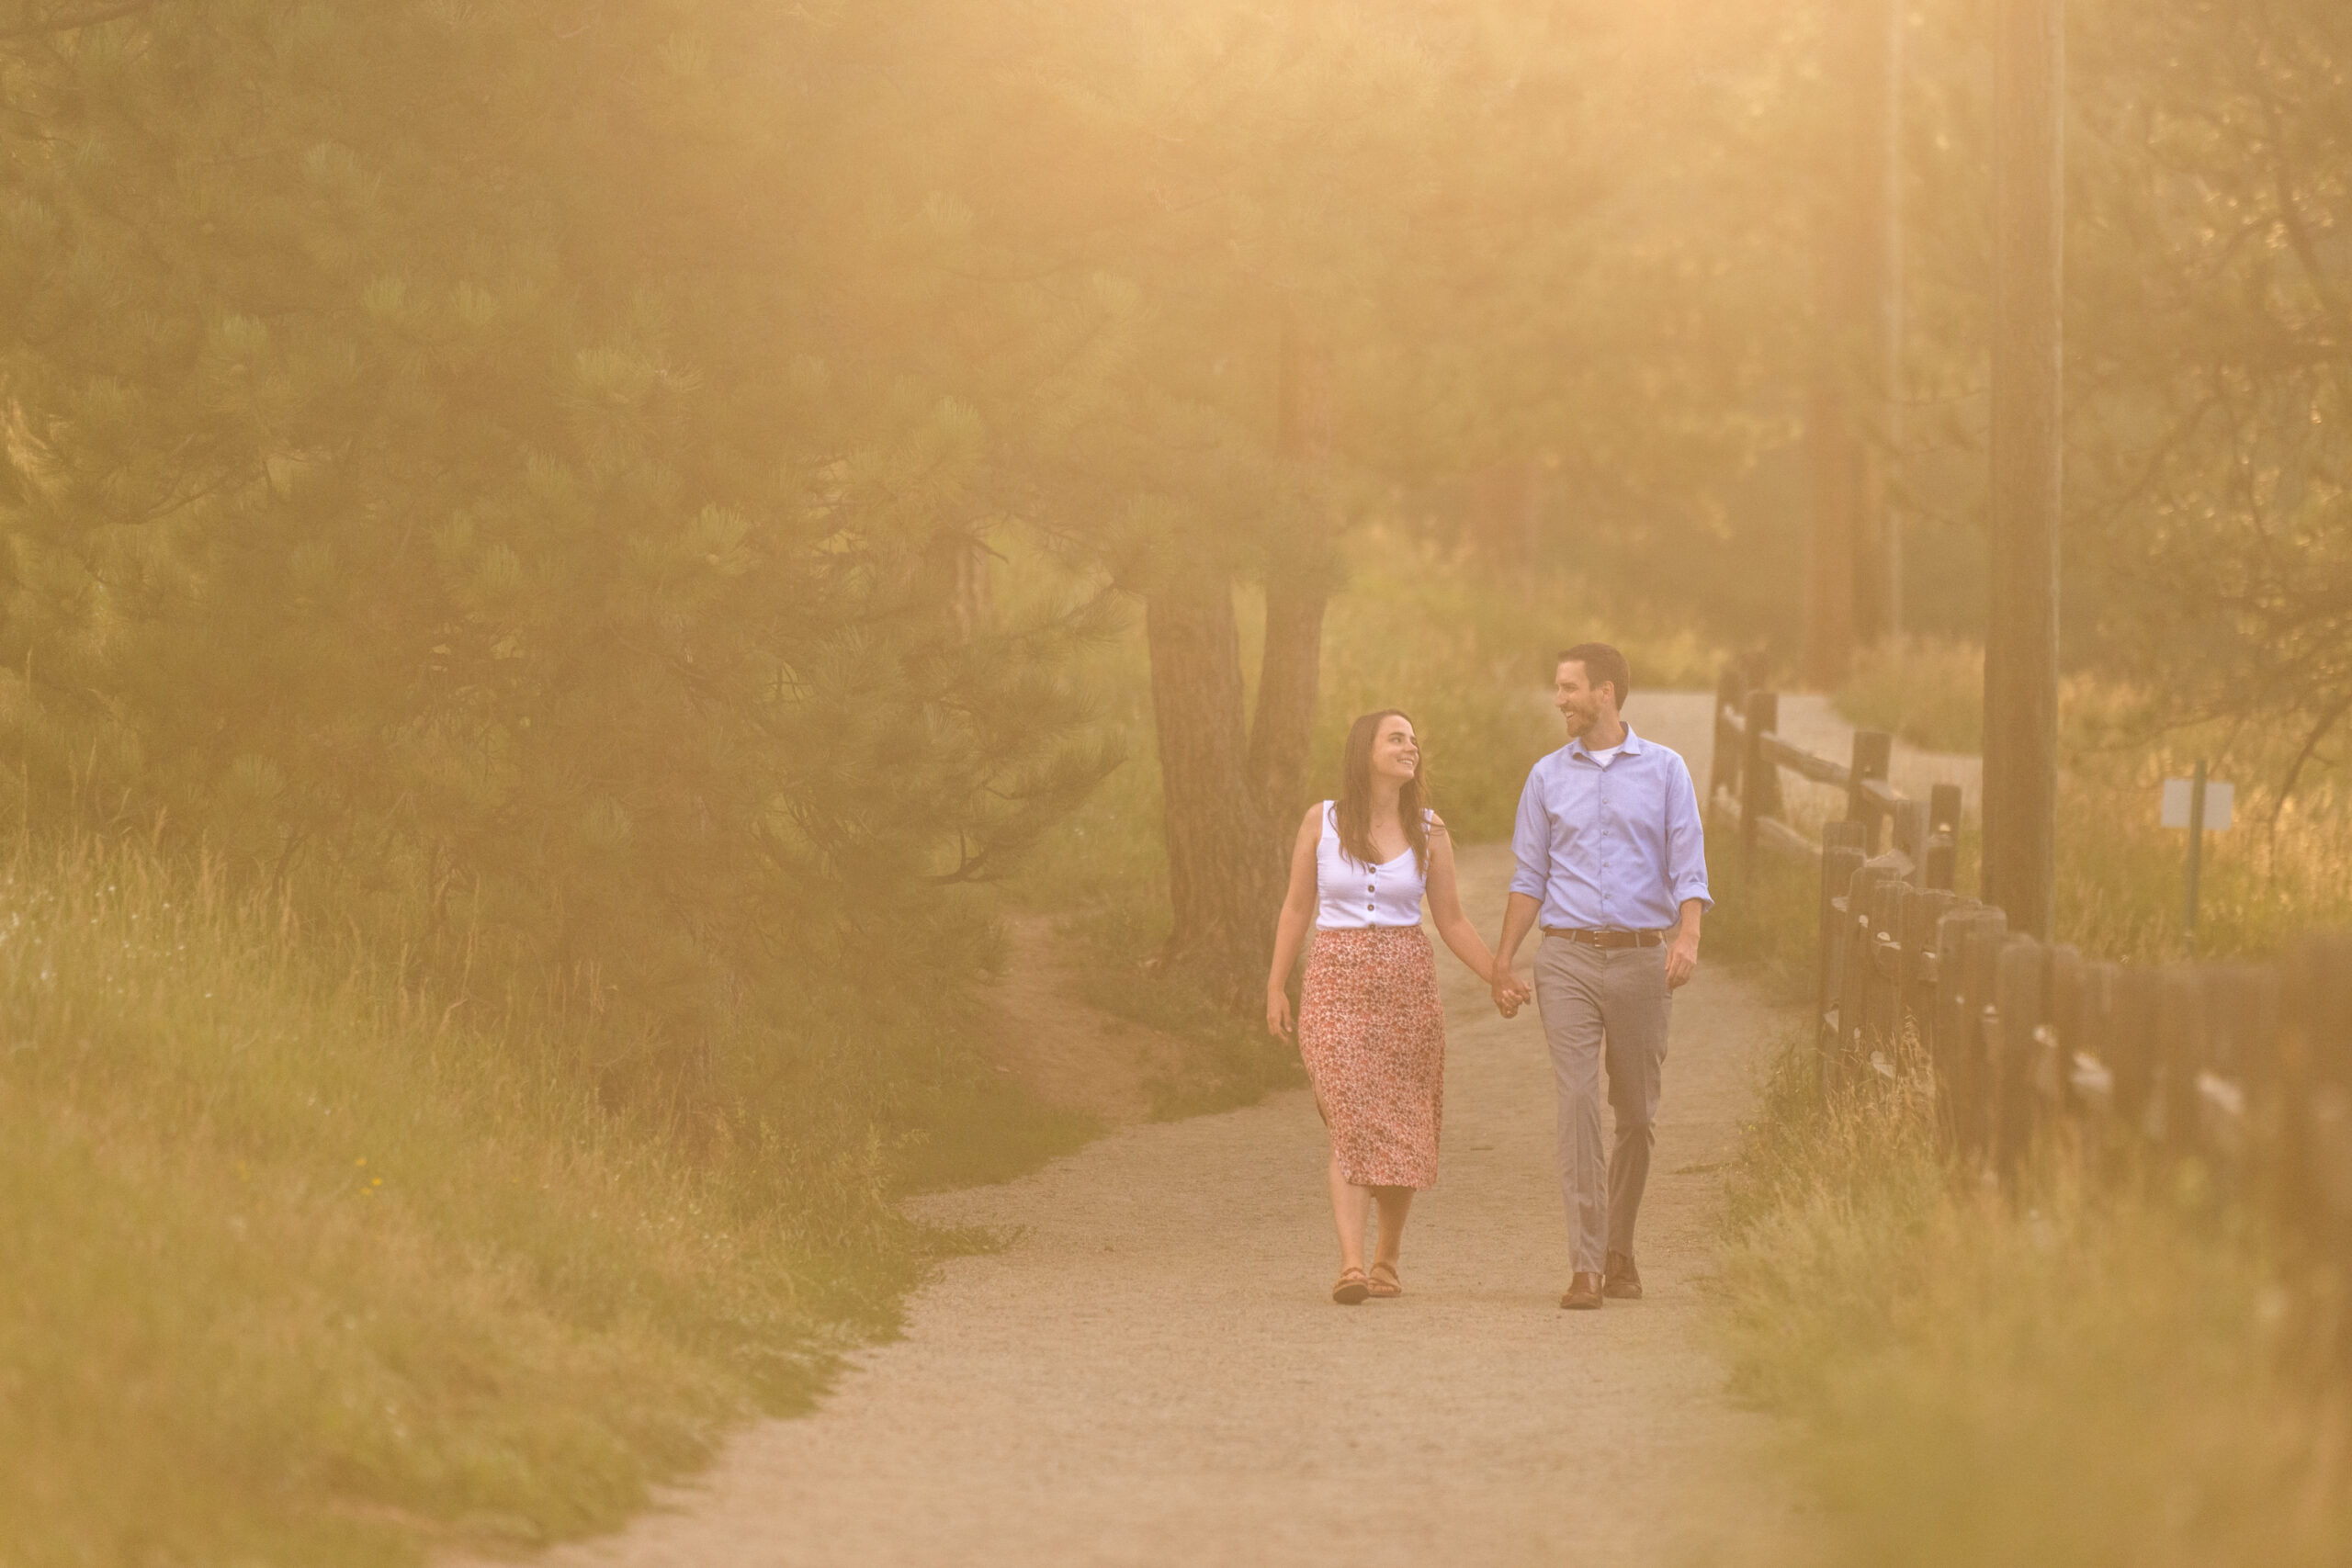 Alice and Joe hold hands during an engagement photo shoot at Evergreen Lake in Evergreen, Colorado.